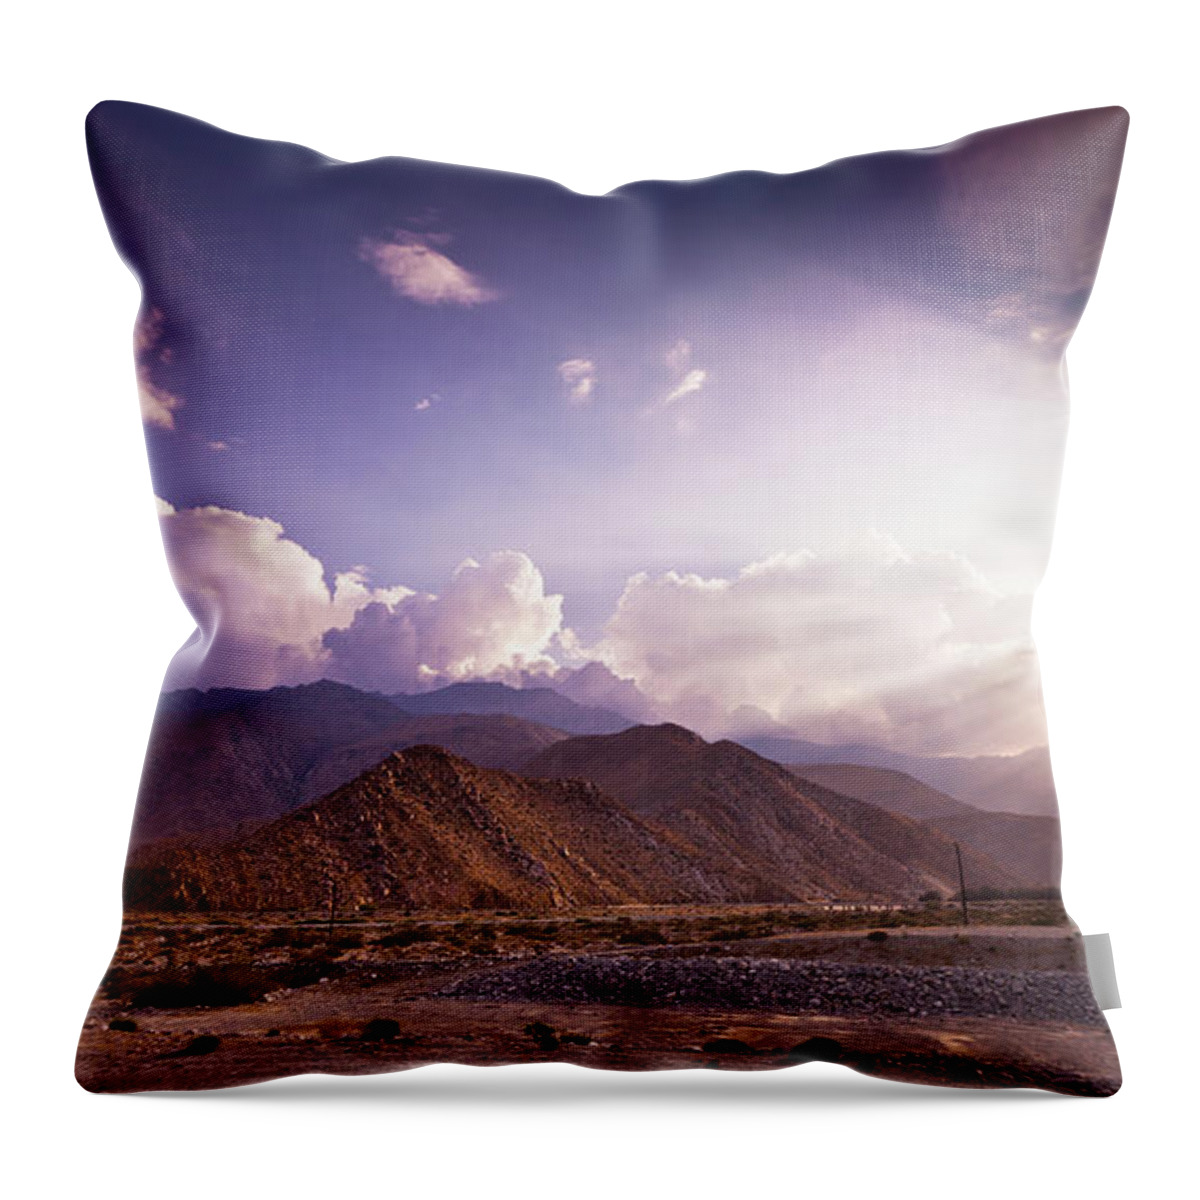 Empty Throw Pillow featuring the photograph Dramatic Palm Springs Landscape #1 by Halbergman